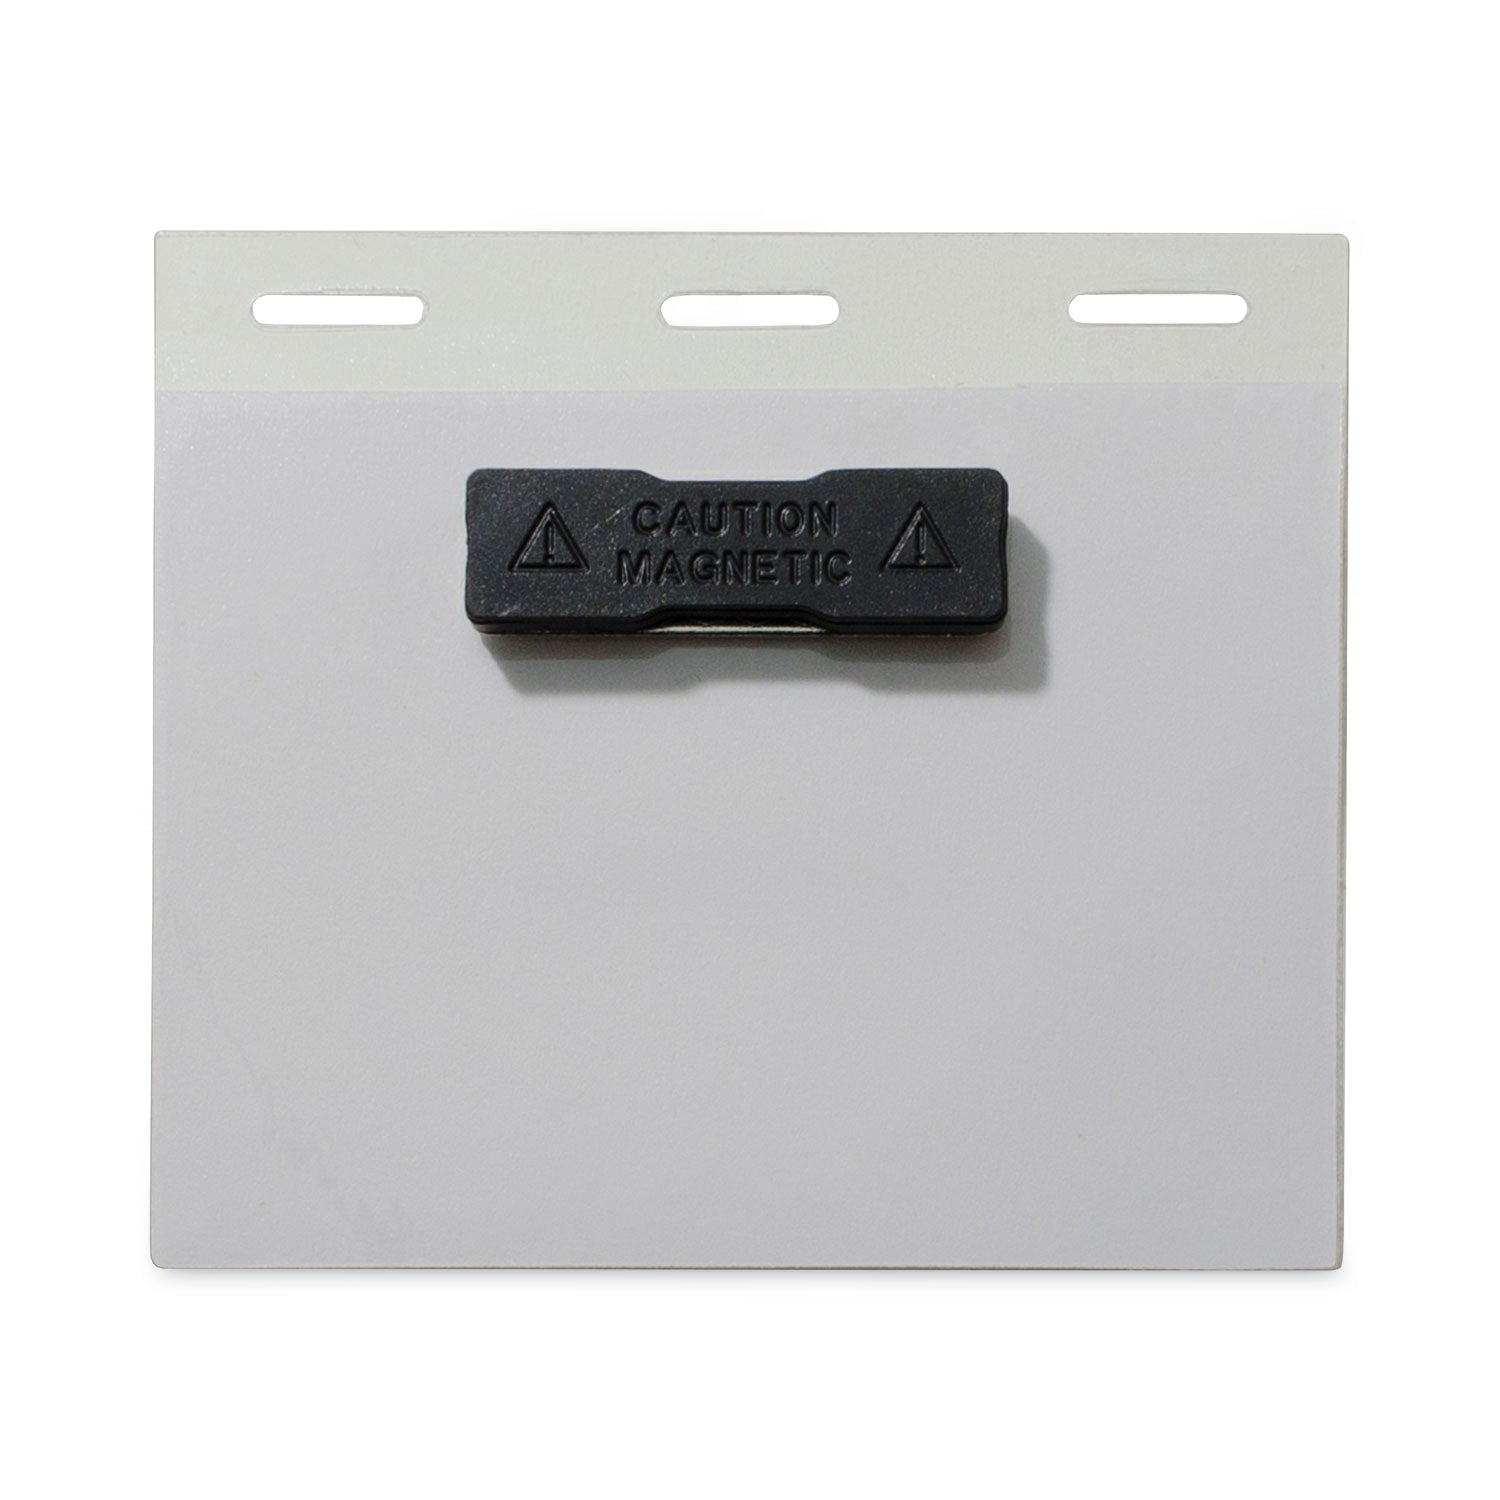 self-laminating-magnetic-style-name-badge-holder-kit-3-x-4-clear-20-box_cli92843 - 3